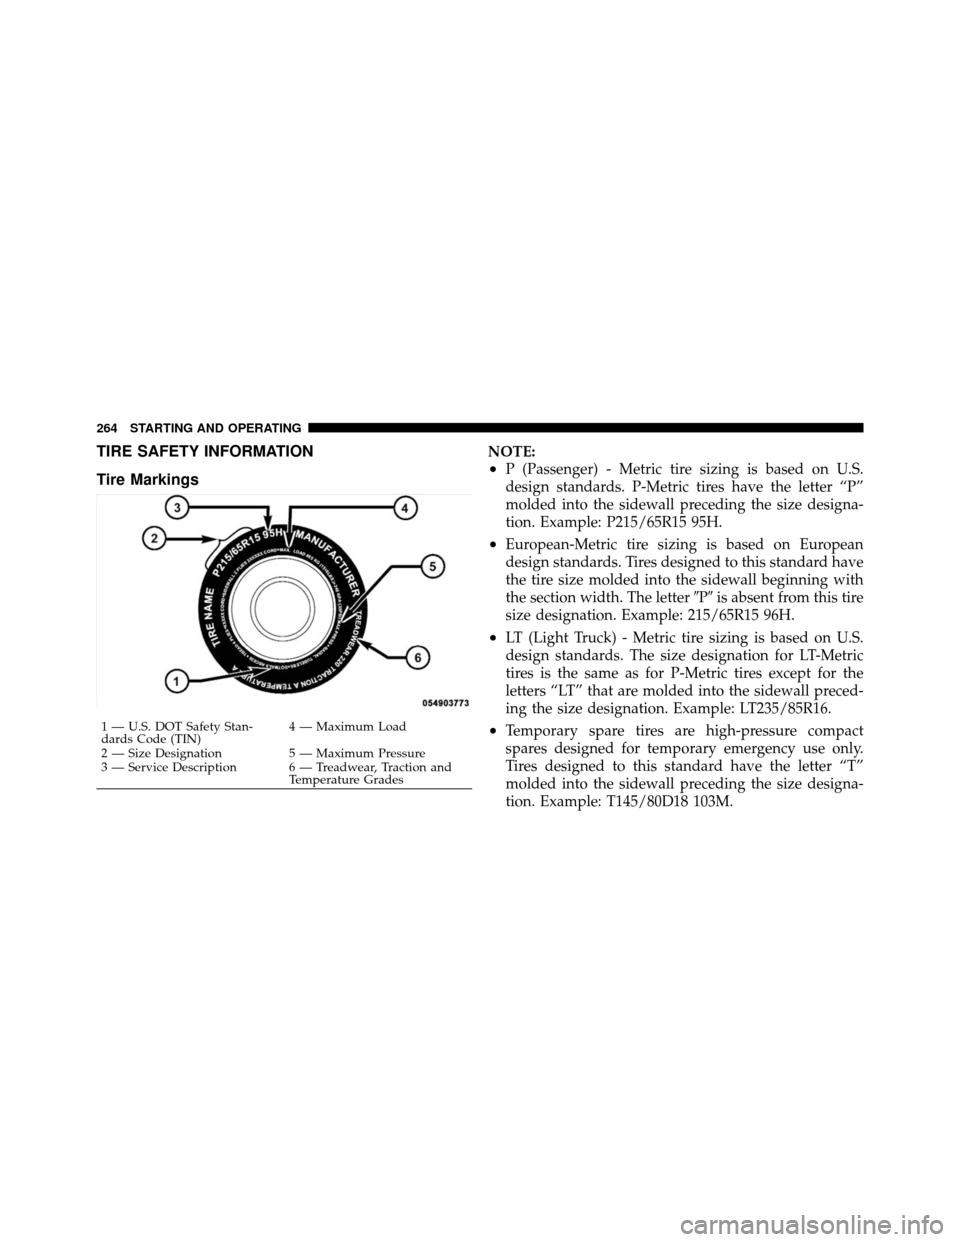 CHRYSLER SEBRING SEDAN 2010 3.G Owners Manual TIRE SAFETY INFORMATION
Tire MarkingsNOTE:
•P (Passenger) - Metric tire sizing is based on U.S.
design standards. P-Metric tires have the letter “P”
molded into the sidewall preceding the size d